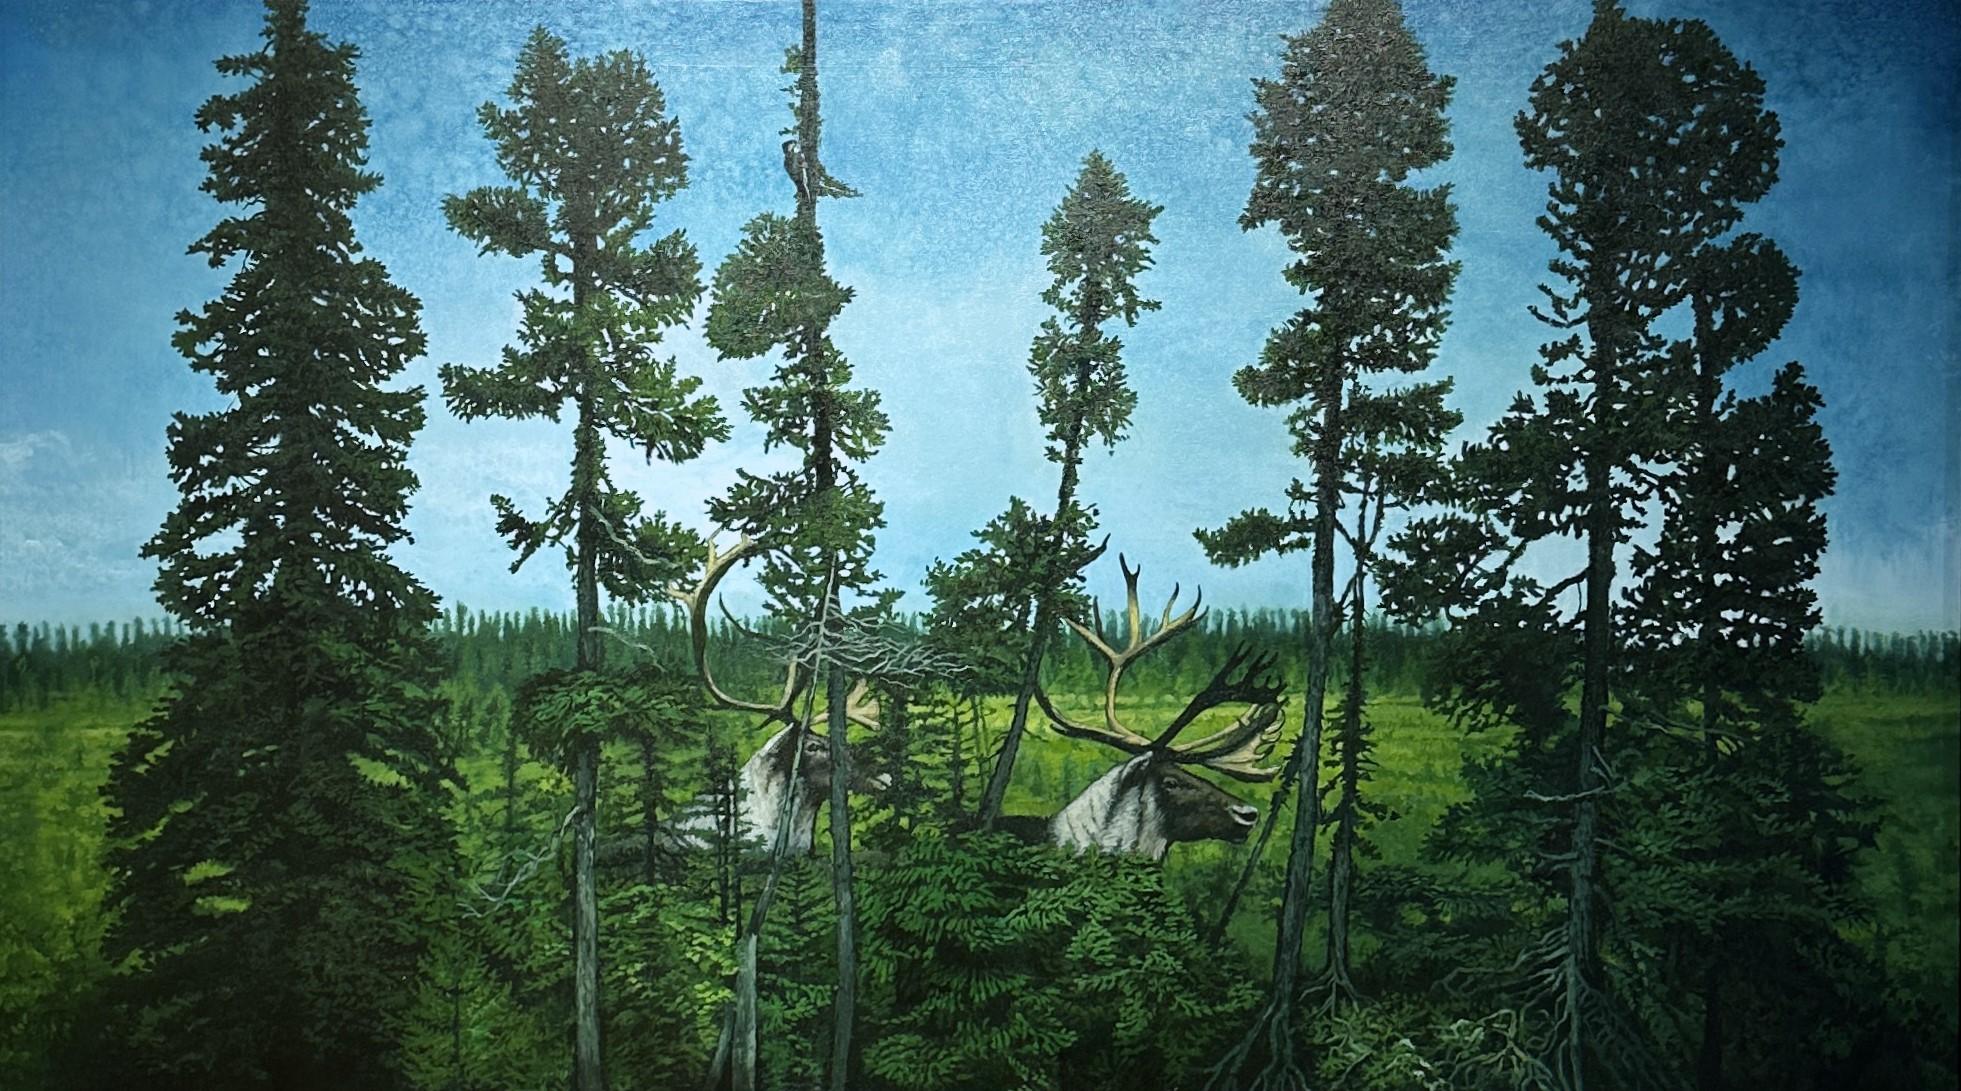 Don Pollack Animal Painting - The Big Land - Serene Wooded Landscape with Hidden Caribou, Oil on Canvas